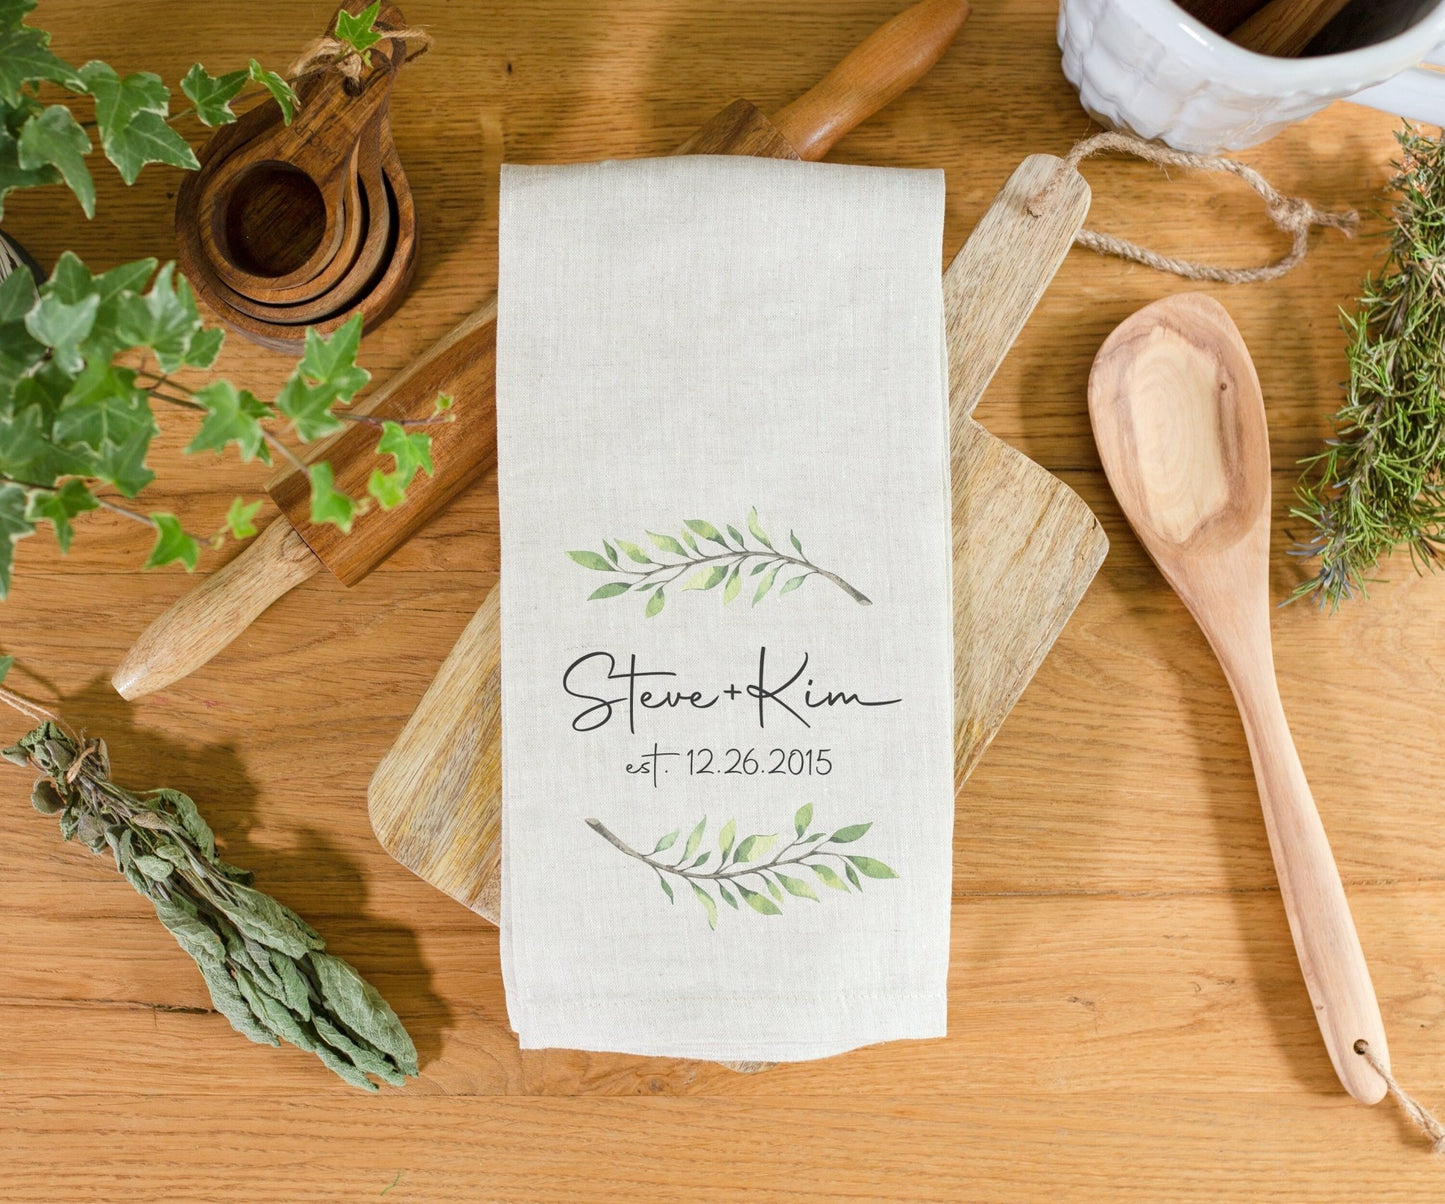 Personalized Names and Established Date Linen Tea Towel | Wedding Gift Idea | Personalized Bridal Shower Gift | Housewarming Gift Idea